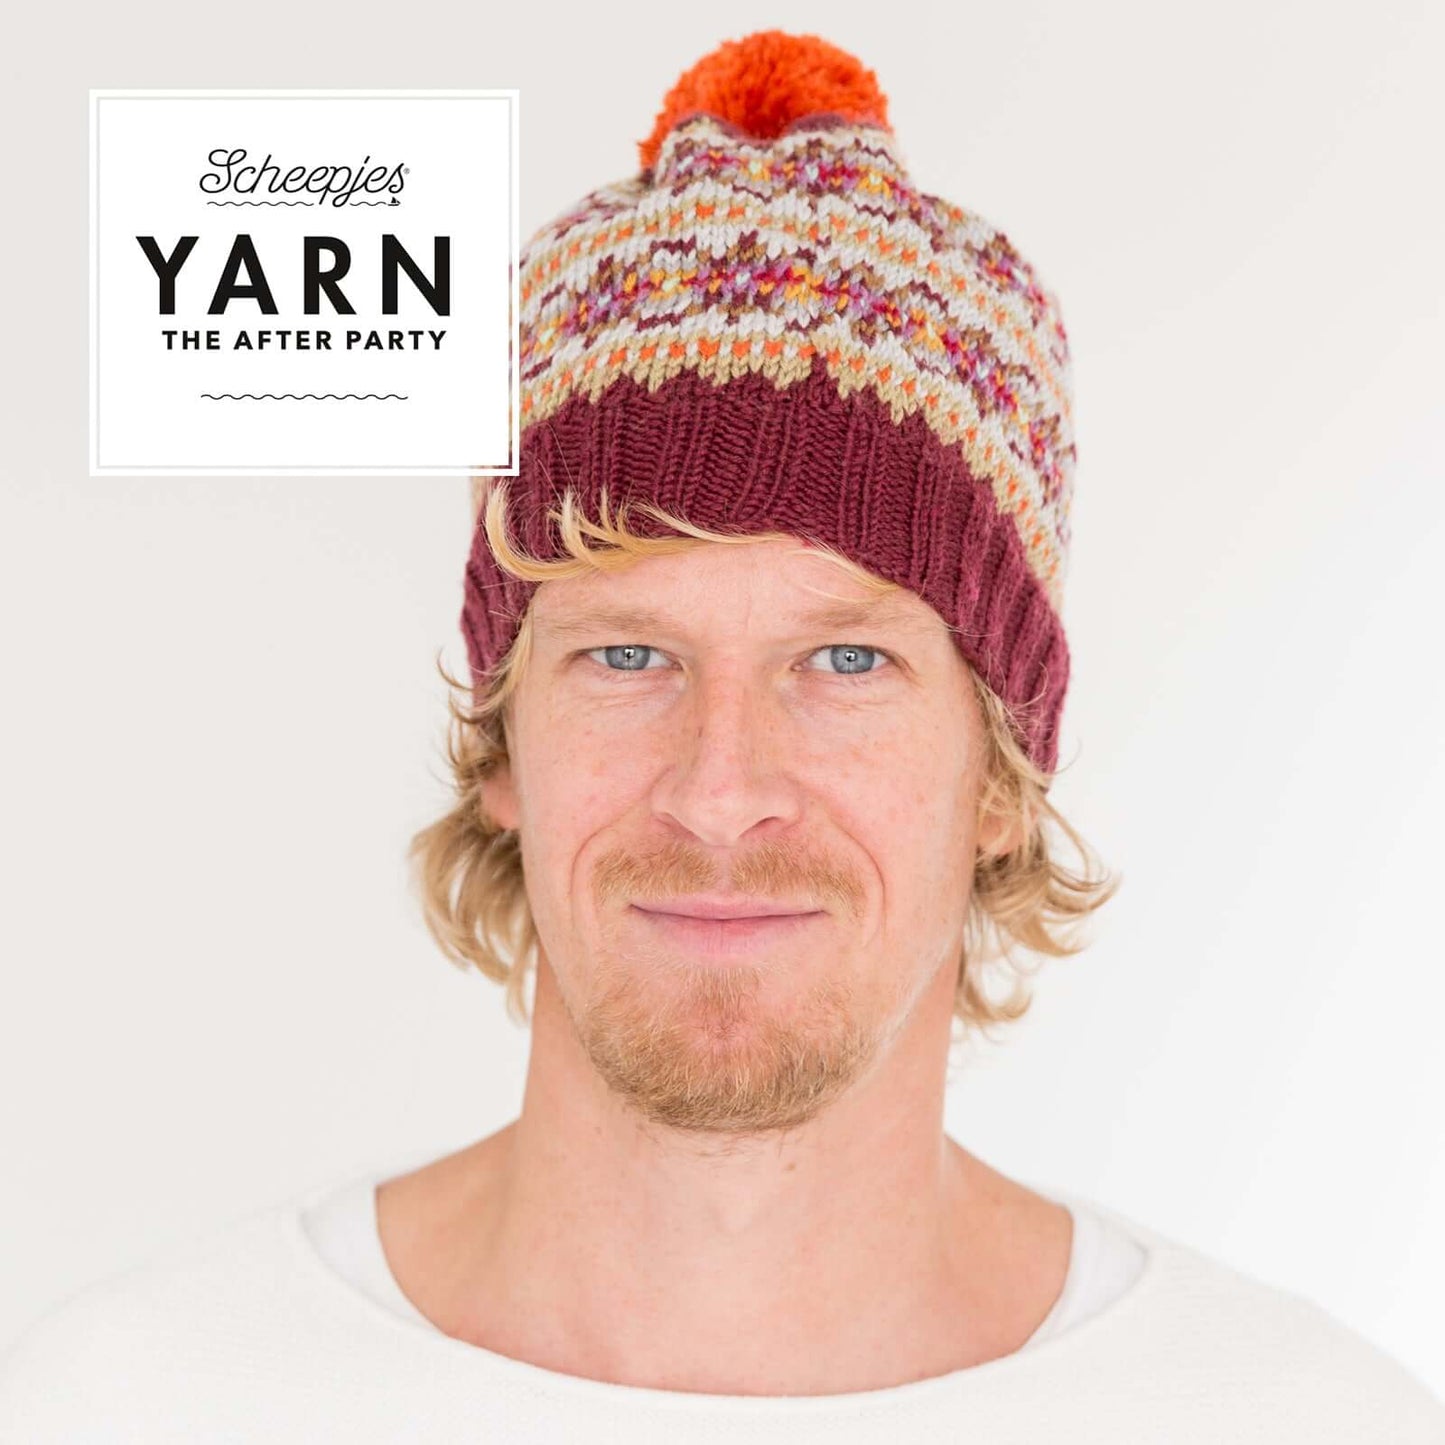 Scheepjes Yarn The After Party no. 36 - Autumn Colours Bobble Hat (booklet) - (Knit)